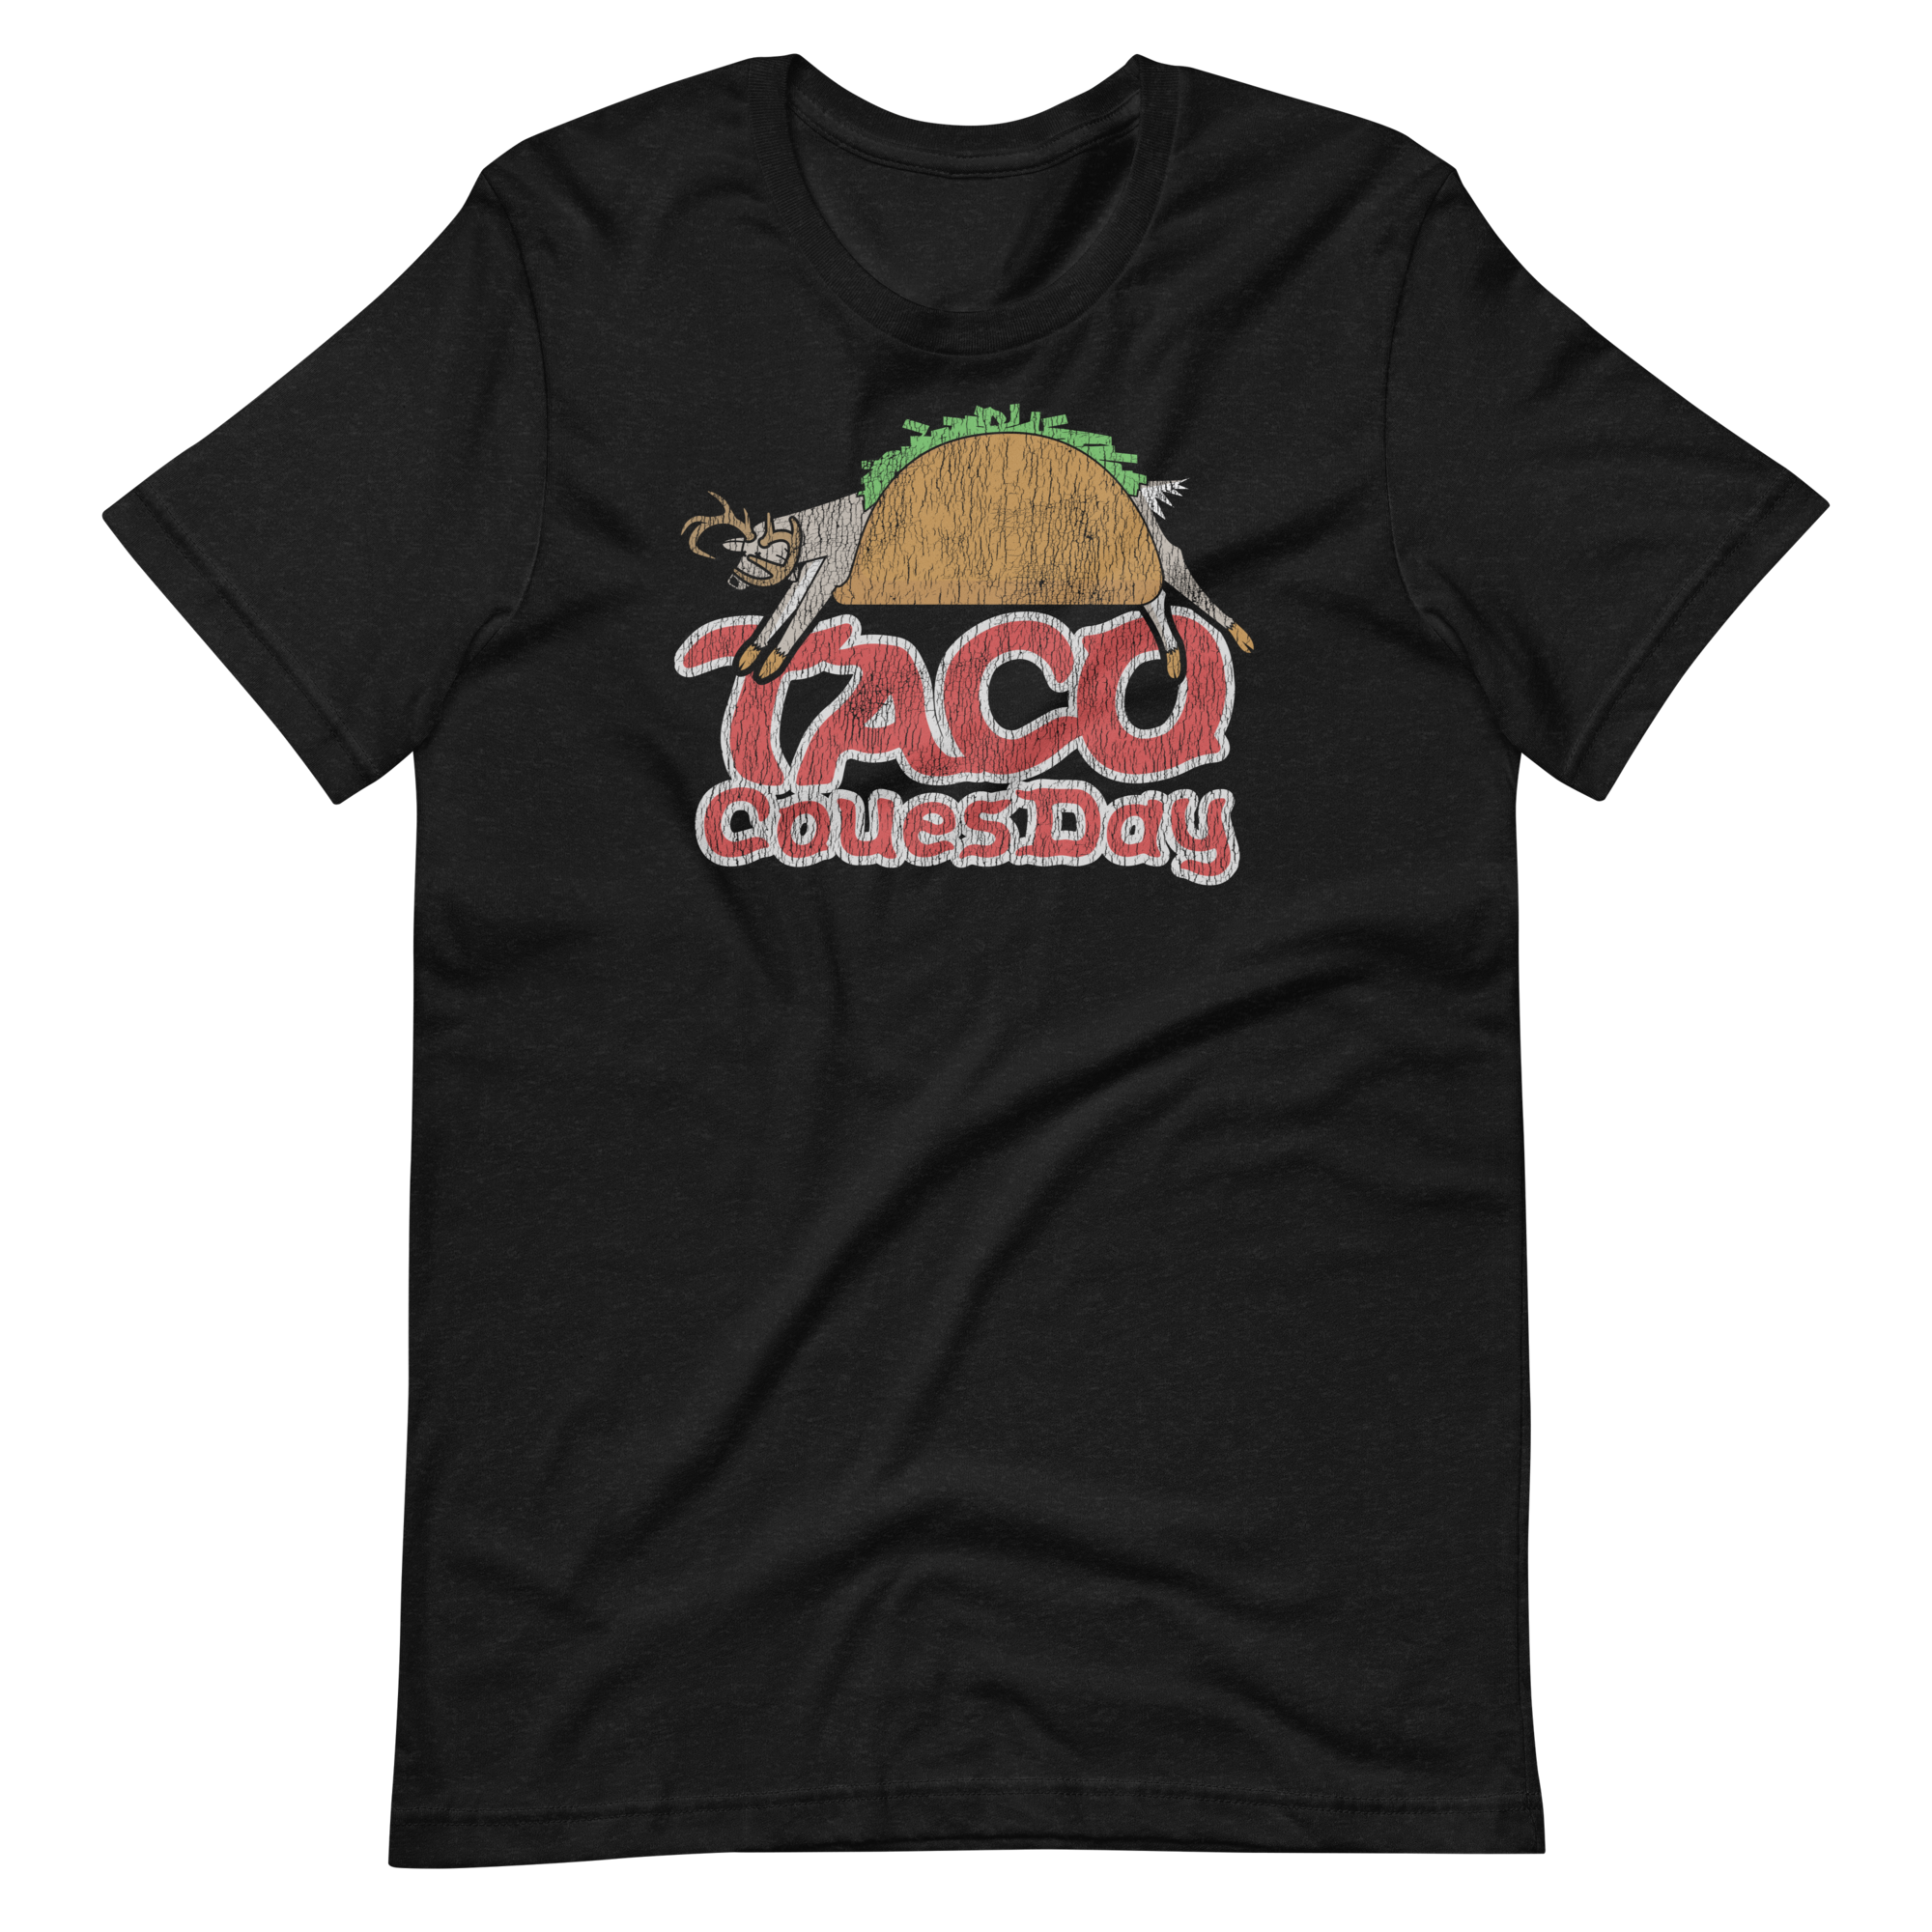 Taco CouesDay T-Shirt